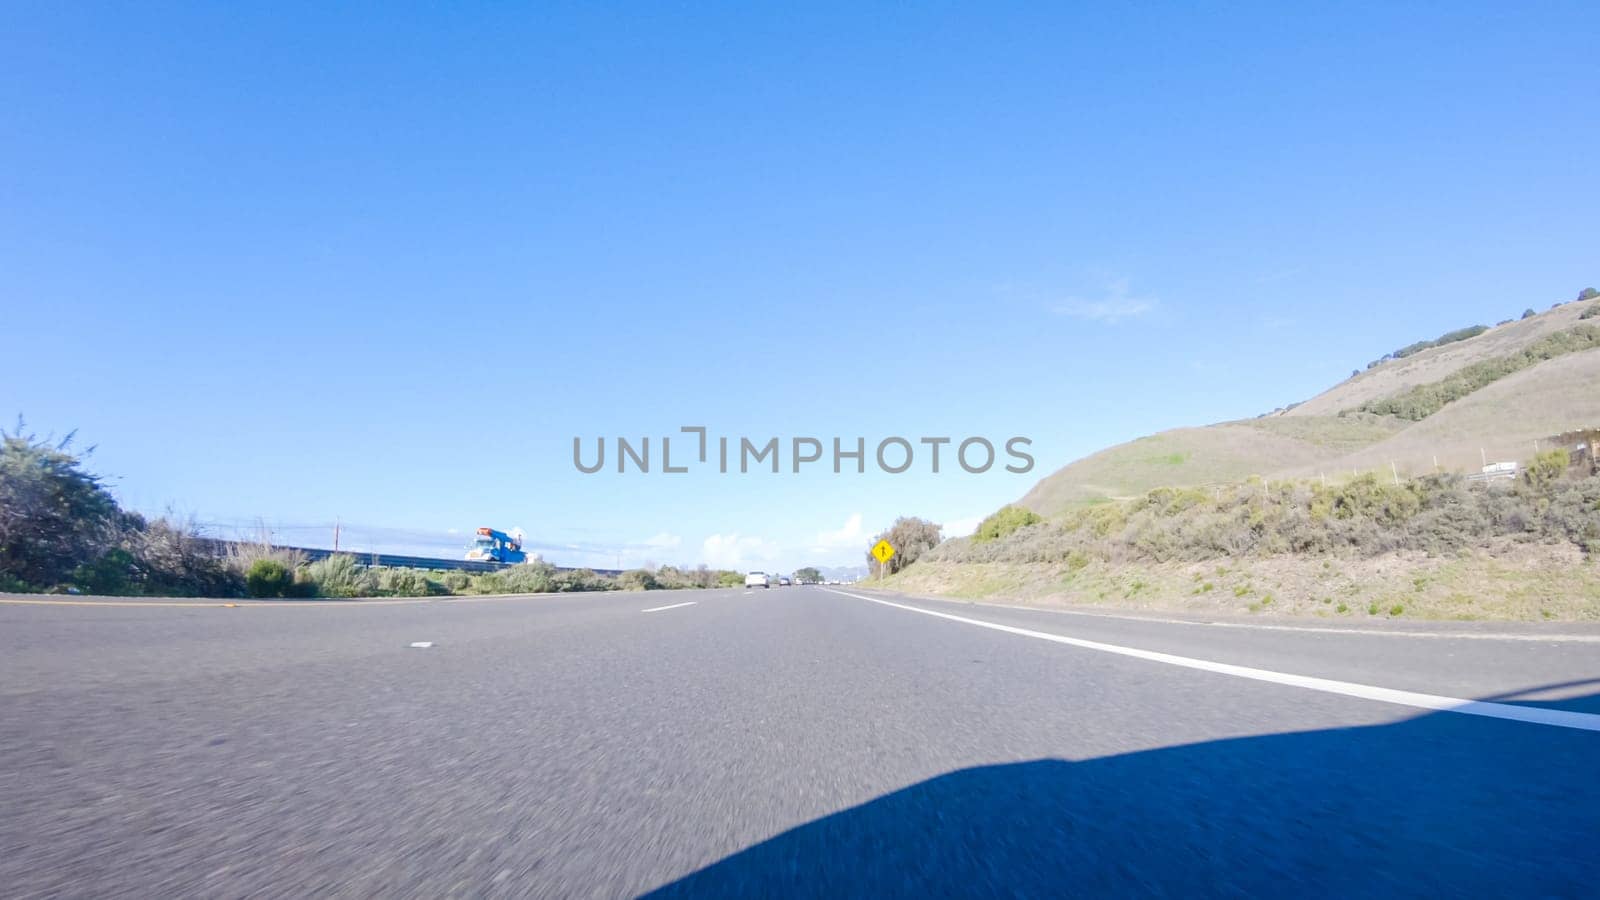 On a crisp winter day, a car cruises along the iconic Highway 1 near San Luis Obispo, California. The surrounding landscape is brownish and subdued, with rolling hills and patches of coastal vegetation flanking the winding road.